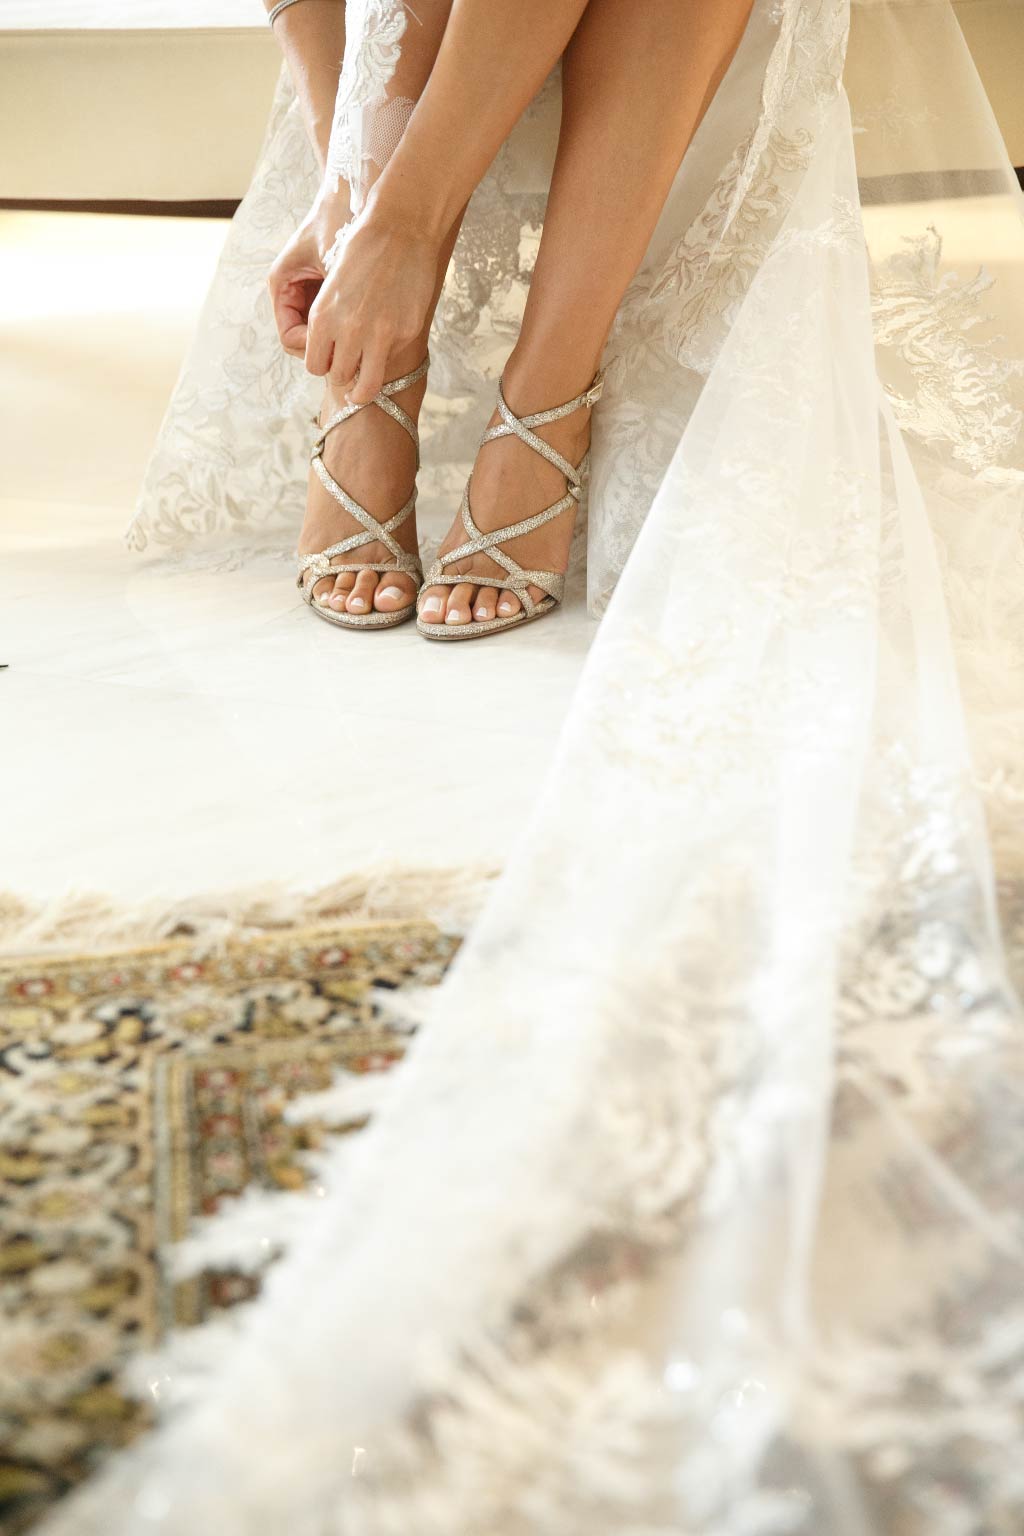 Bridal shoes and wedding dress tail